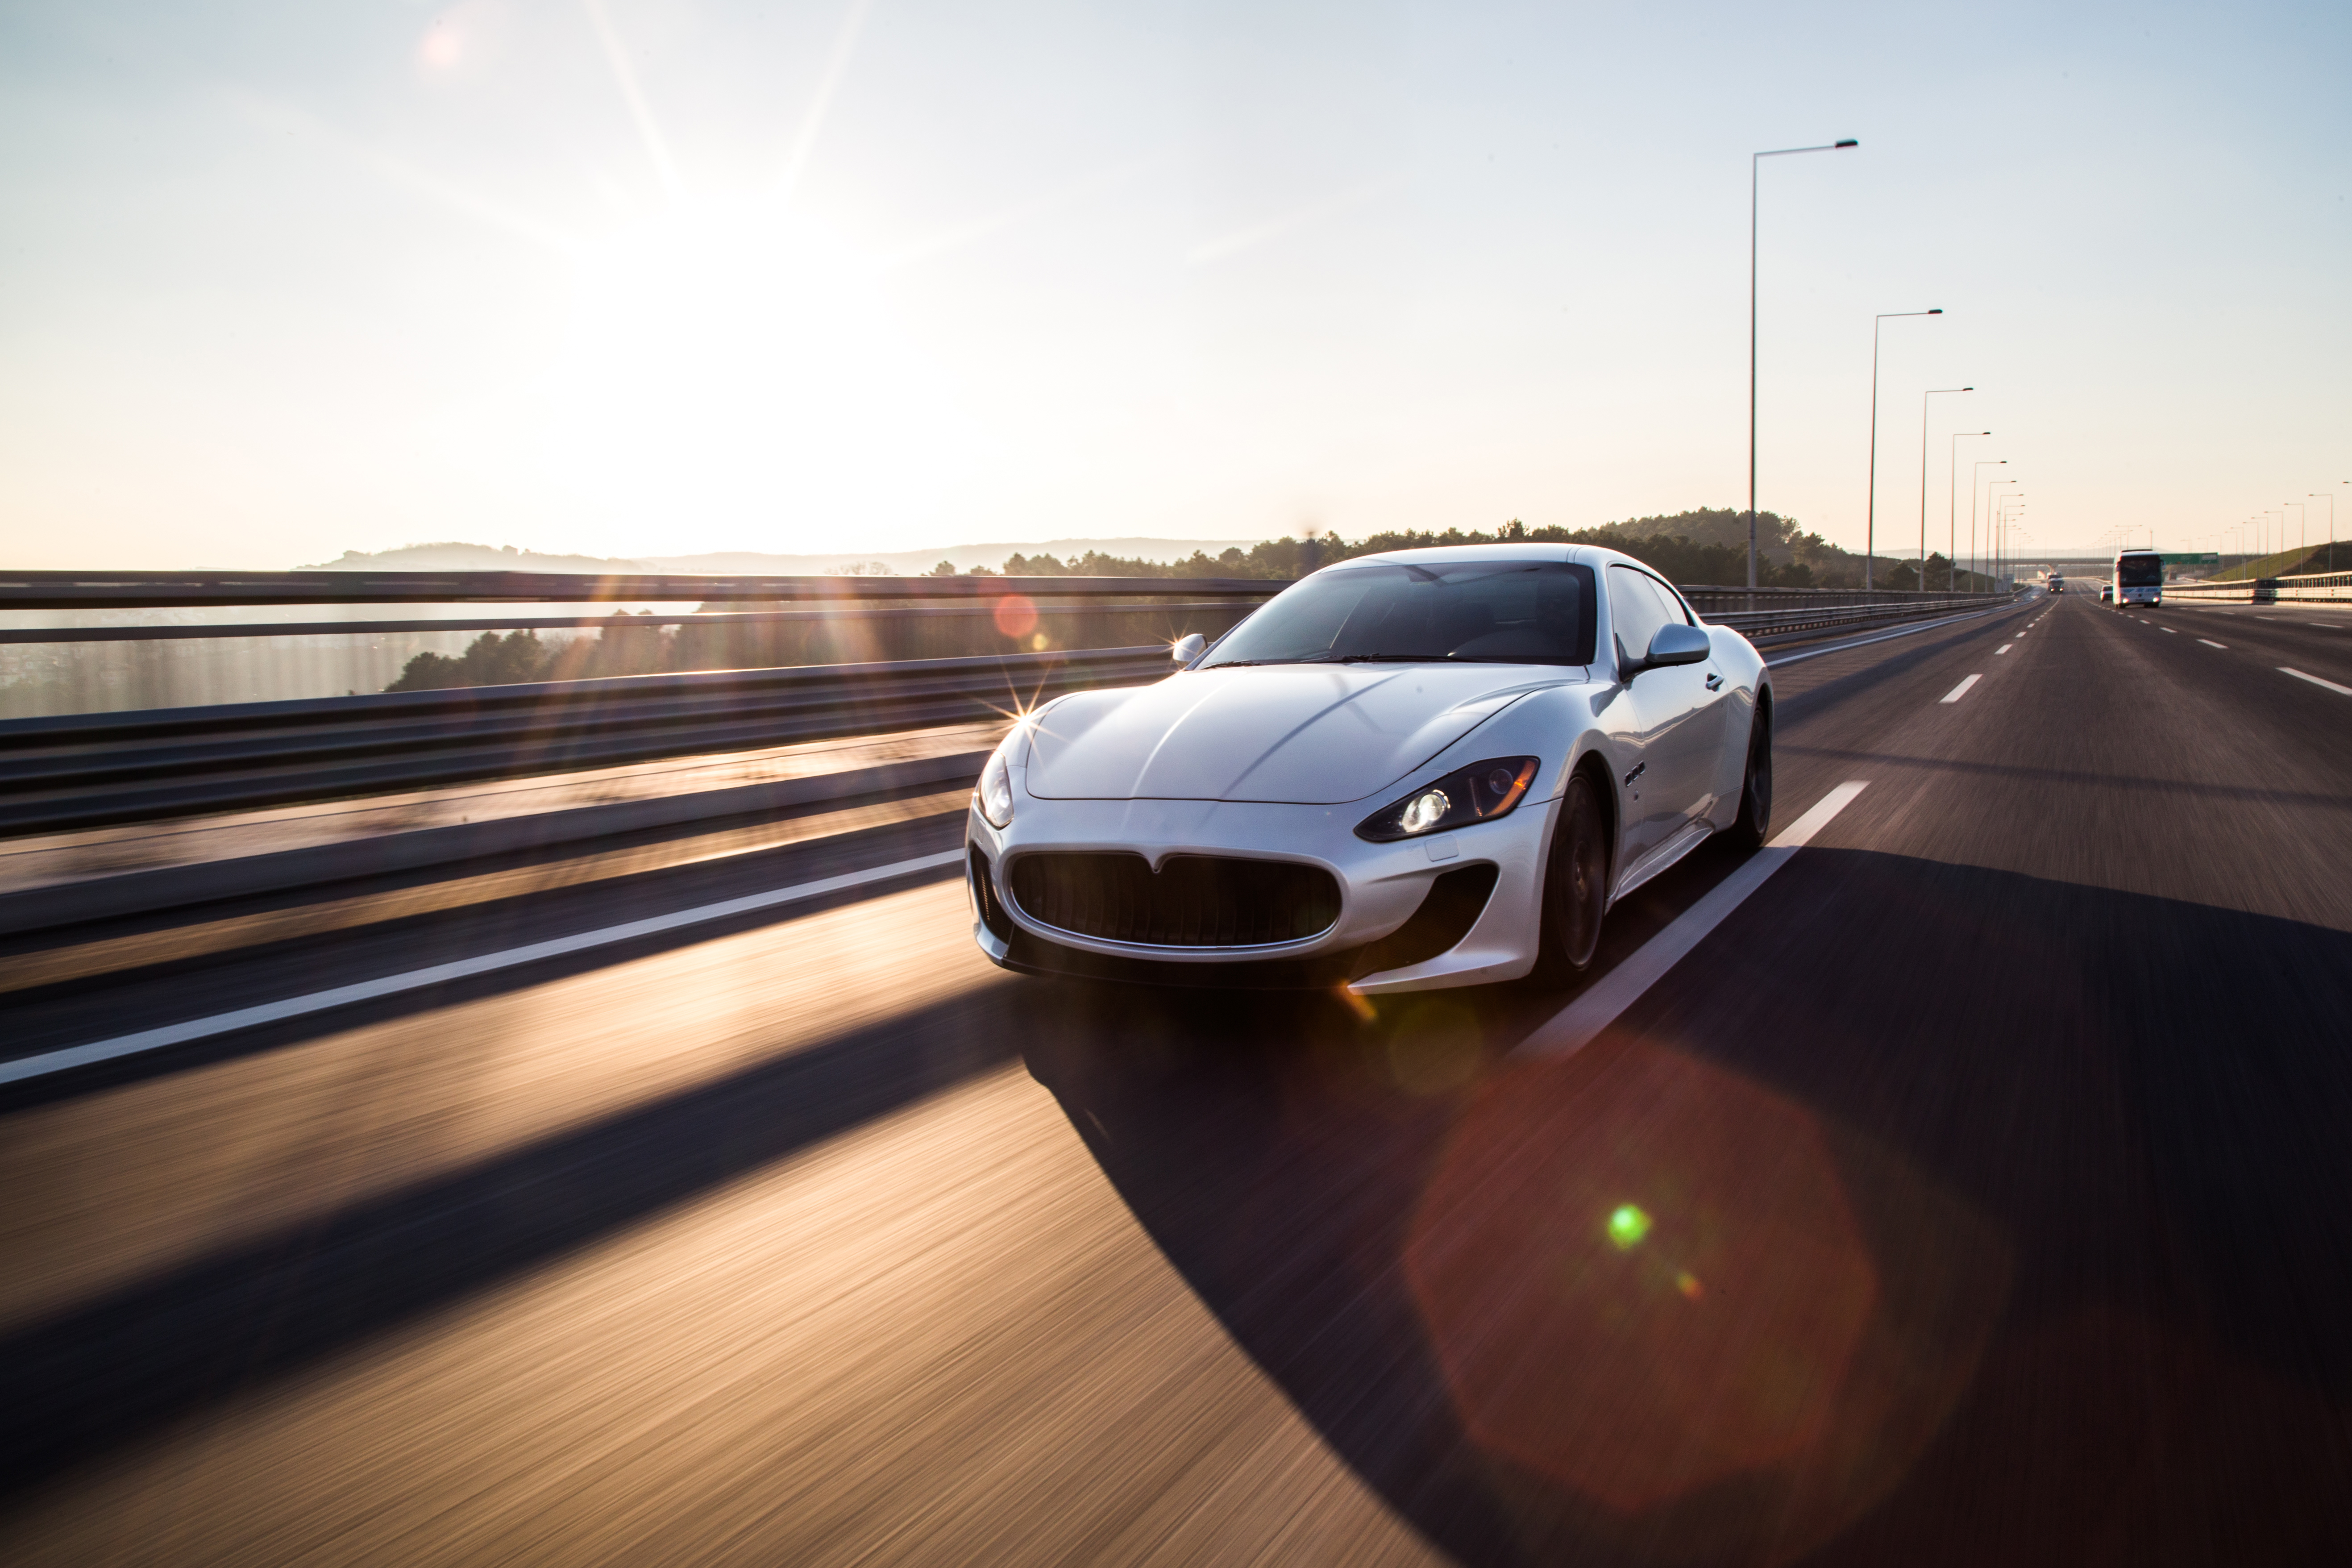 https://img.moneyduck.com/article_attachment/1663904356-front-view-high-speed-silver-sport-car-driving-highway.jpg